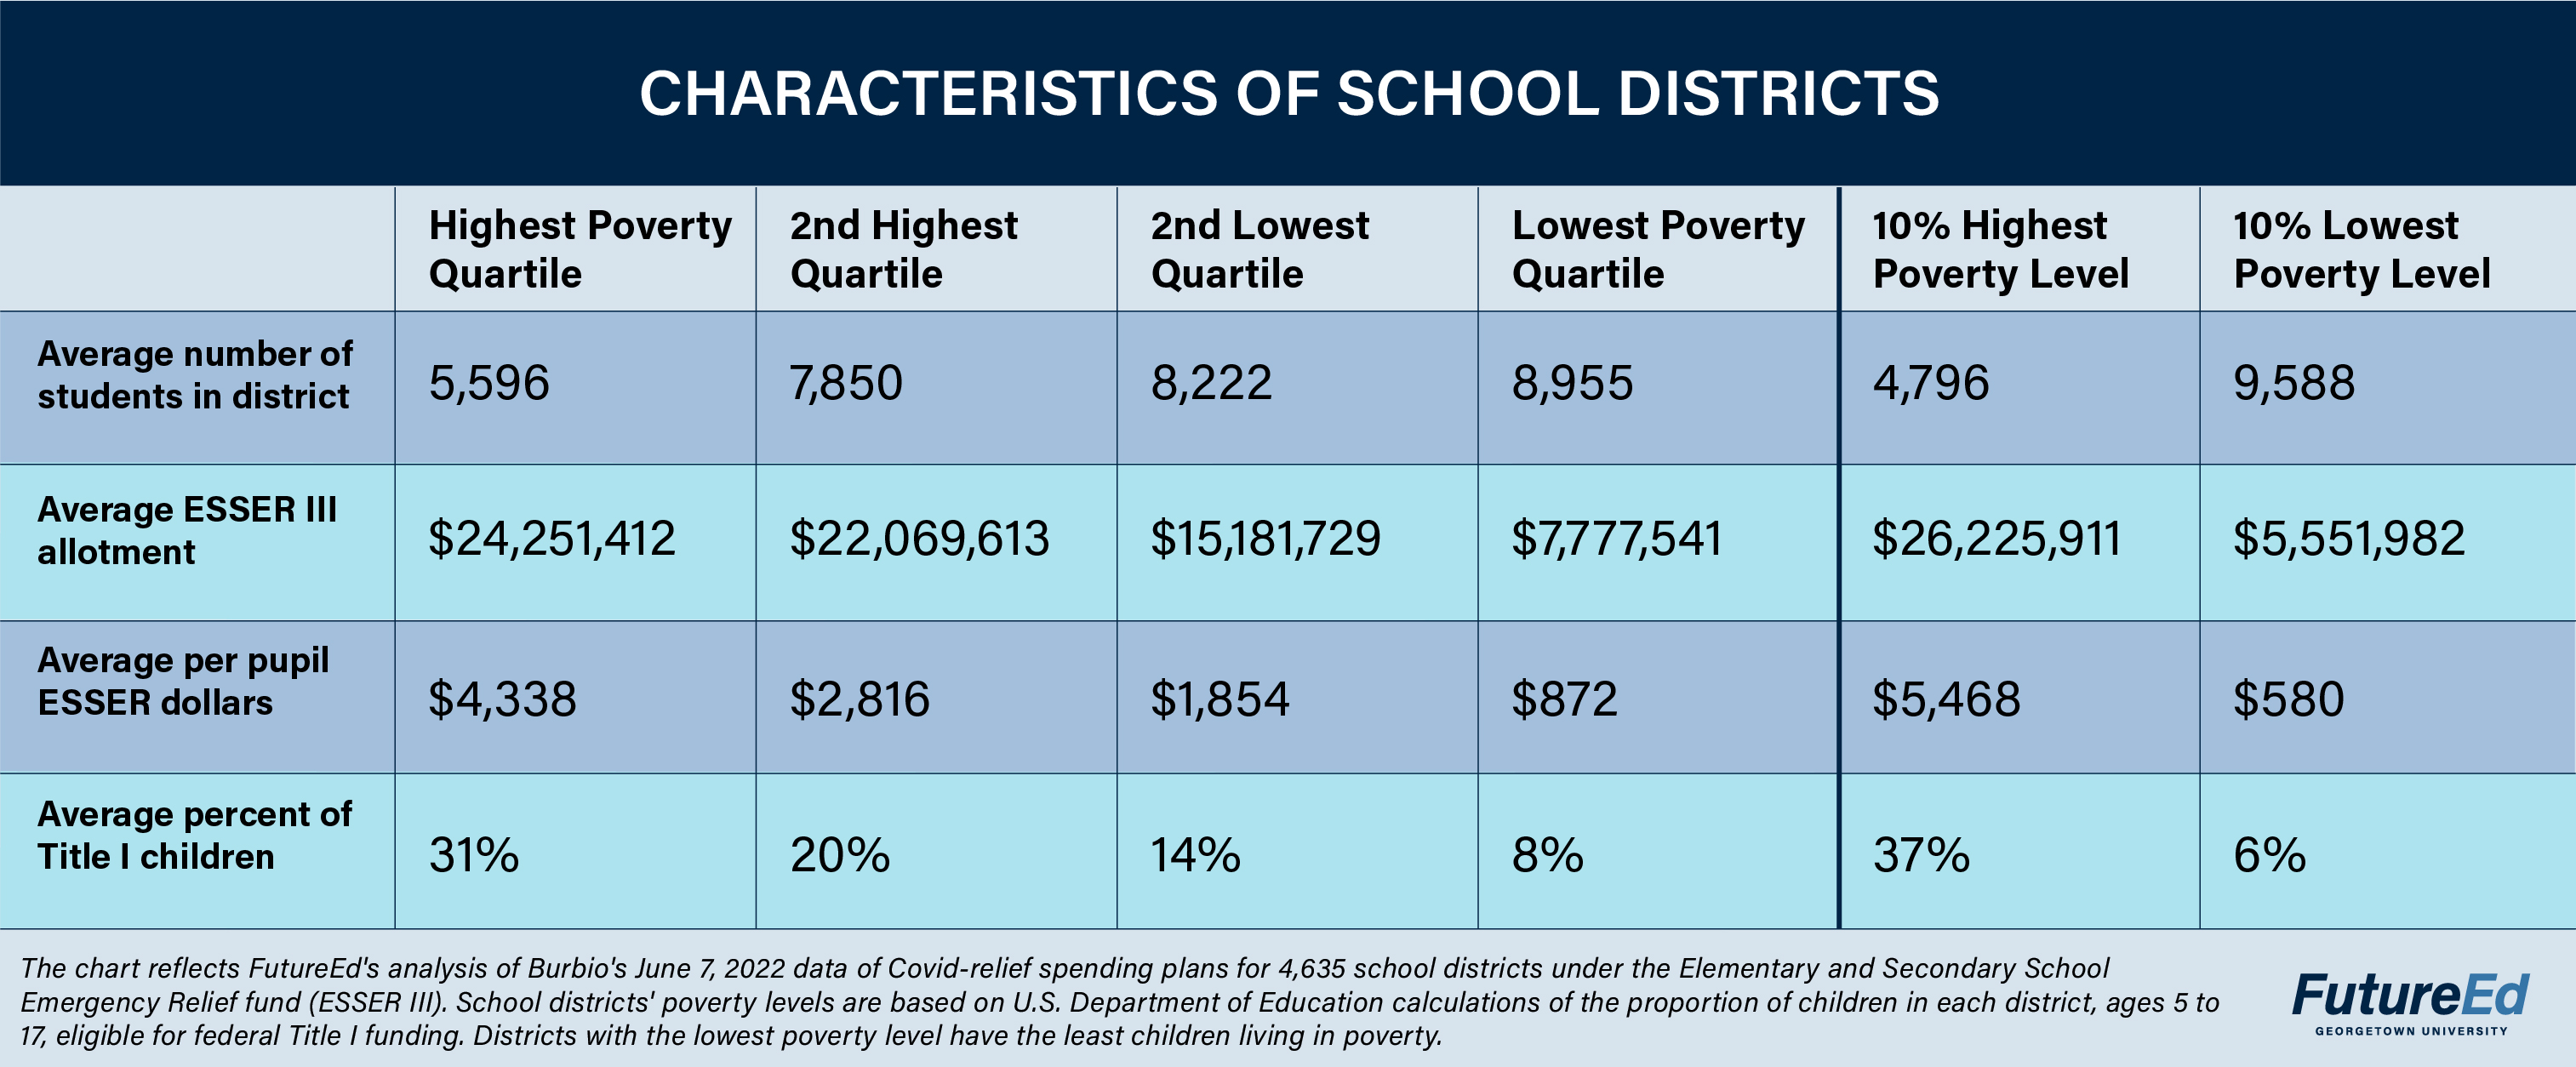 Chart: Characteristics of School Districts. Average number of students in the district: highest poverty quartile 5,596; second highest quartile 7,850; 2nd lowest quartile 8,222; lowest poverty quartile 8,955; 10% highest poverty level 4,796; 10% lowest poverty level 9,588. Average ESSER III allotment: highest poverty quartile $24,251,412; 2nd highest quartile $22,069,613; 2nd lowest quartile $15,181,729; lowest poverty quartile $7,777,541; 10% highest poverty level $26,225,911; 10% lowest poverty level $5,551,982. Average per pupil ESSER dollars: highest poverty quartile $4,338; 2nd highest quartile $2,816; 2nd lowest quartile $1,854; lowest poverty quartile $872; 10% highest poverty level $5,468; 10% lowest poverty level $580. Average percent of Title I children: highest poverty quartile 31%; 2nd highest quartile 20%; 2nd lowest quartile 14%; lowest poverty quartile 8%; 10% highest poverty level 37%; 10% lowest poverty level 6%. (The chart reflects FutureEd's analysis of Burbio's June 7, 2022 data of Covid-relief spending plans for 4,635 school districts. The percentages reflect the proportion of school districts intending to invest in this priority. School districts' poverty levels are based on U.S. Department of Education calculations of the proportion of children in each district, ages 5 to 17, eligible for federal Title I funding. Districts with the lowest poverty level have the least children living in poverty.)